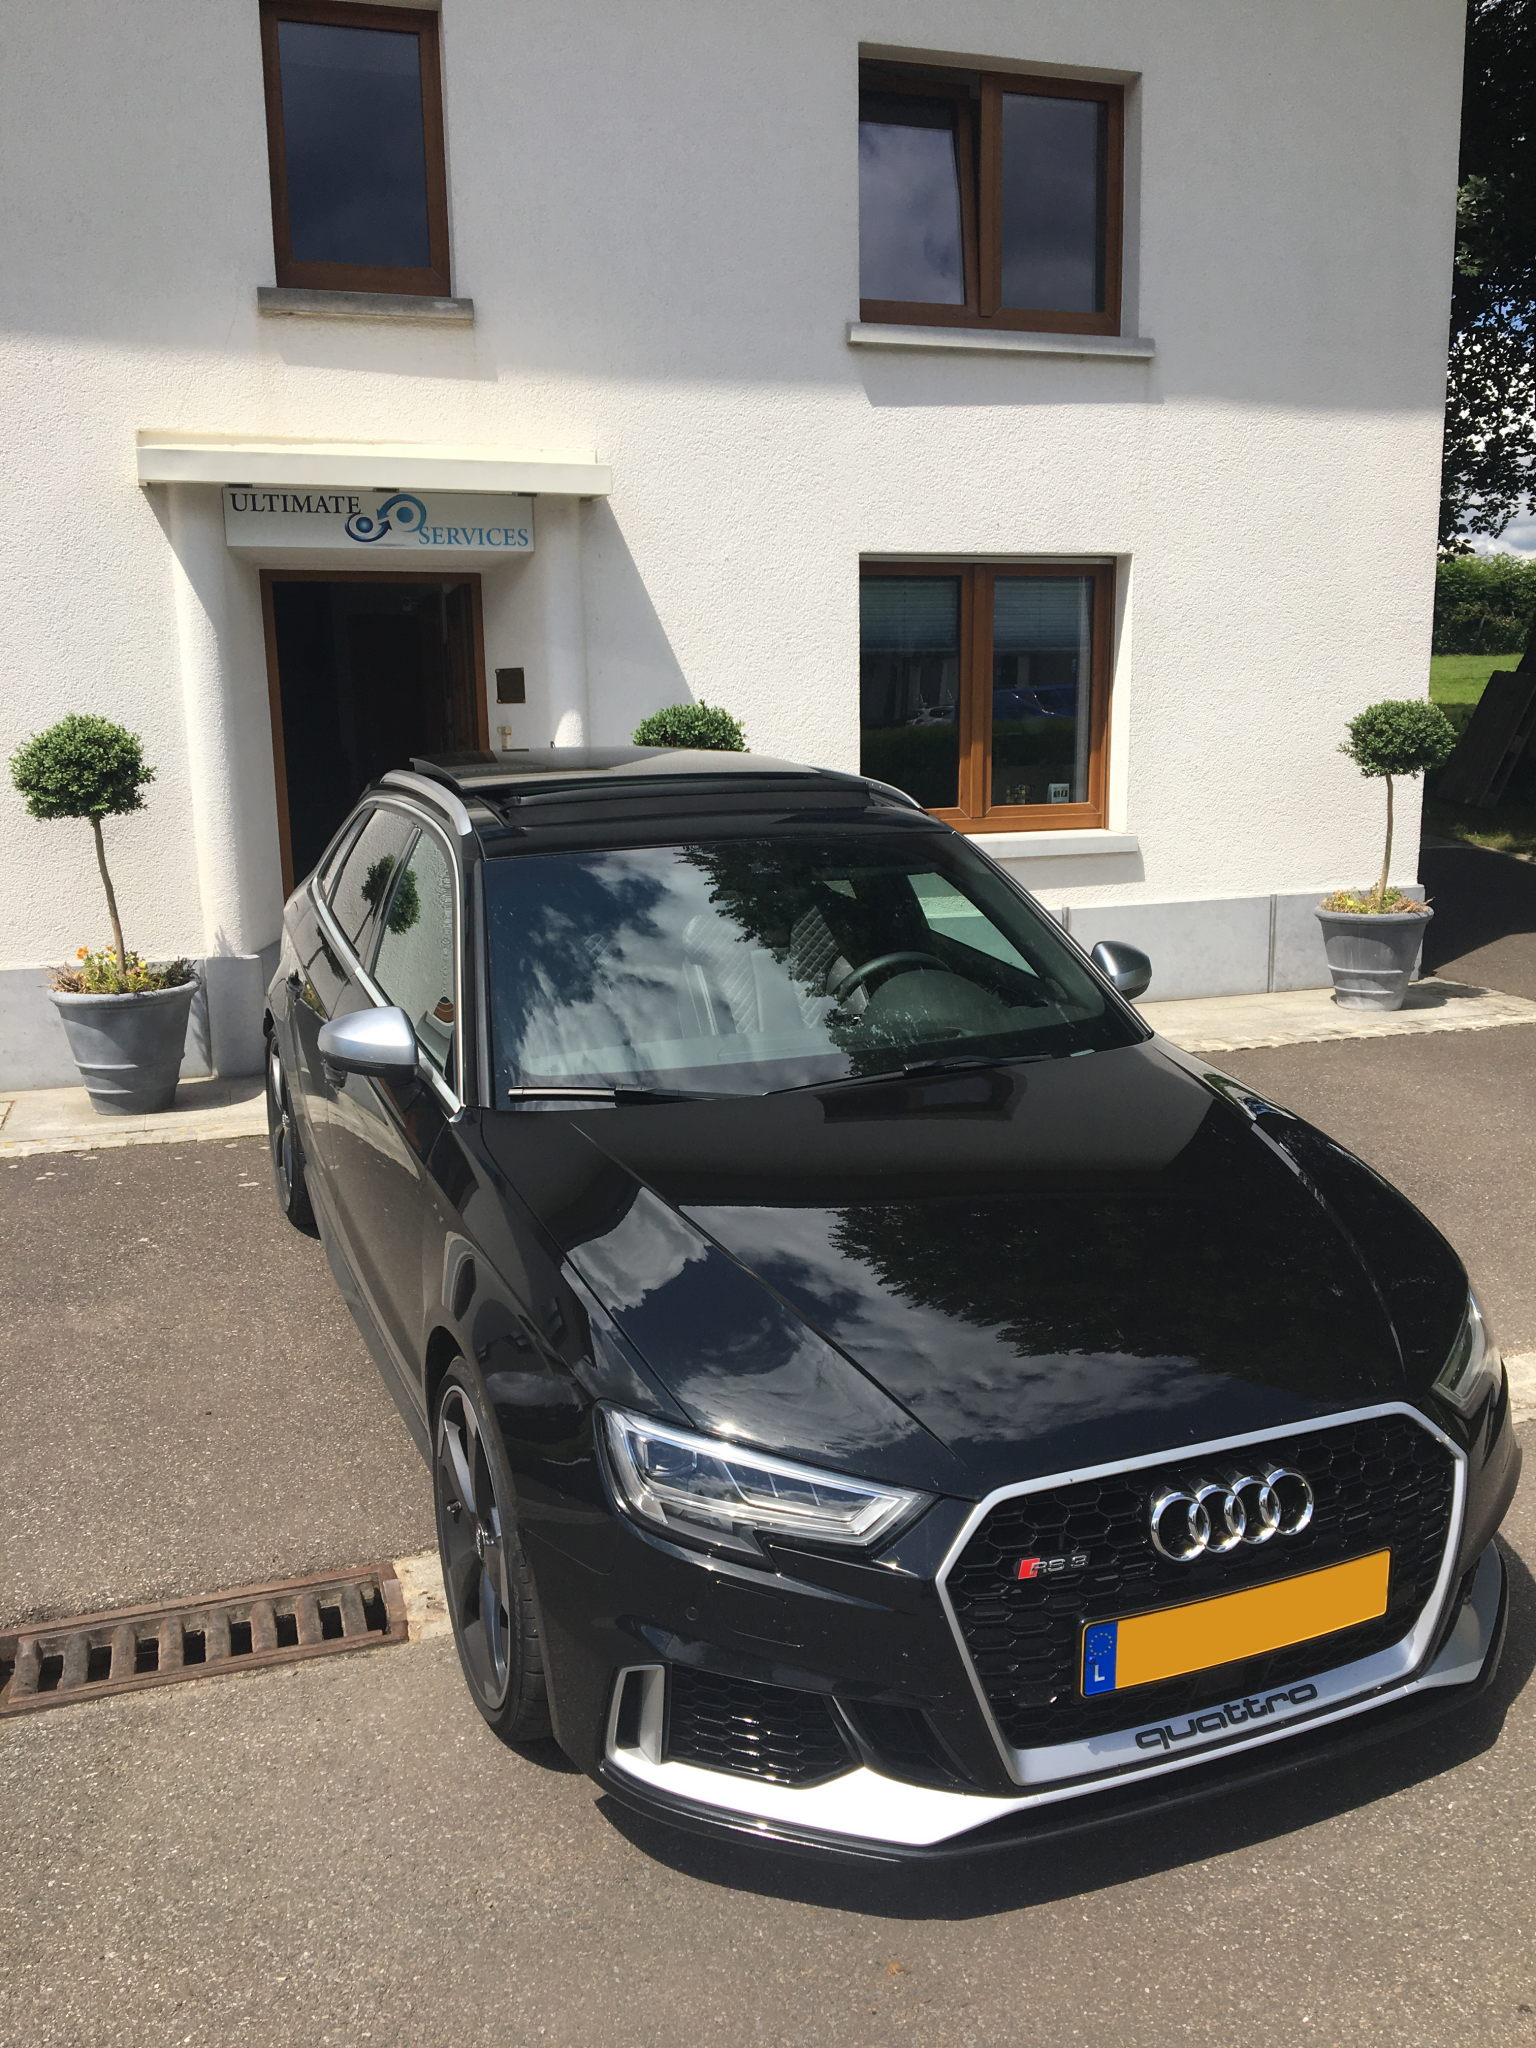 Luxembourg Location Audi Ultimate Services